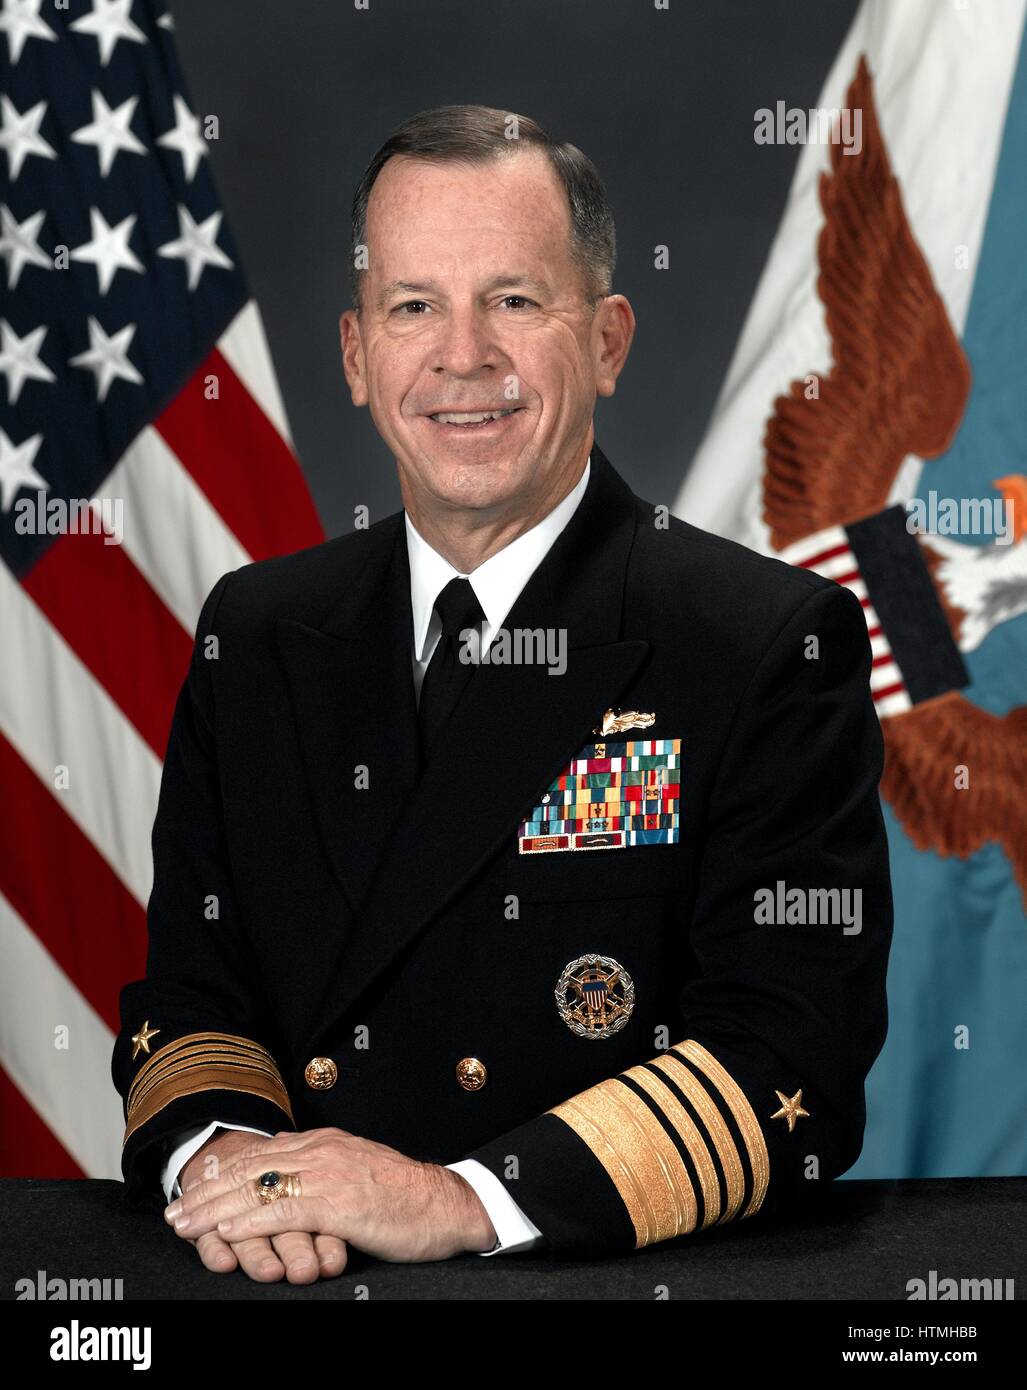 Admiral Michael Glenn 'Mike' Mullen / USN (born October 4 / 1946) is the 17th and current Chairman of the Joint Chiefs of Staff (CJCS). Mullen previously served as the Navy's 28th Chief of Naval Operations from July 22 / 2005 to September 29 / 2007. His o Stock Photo